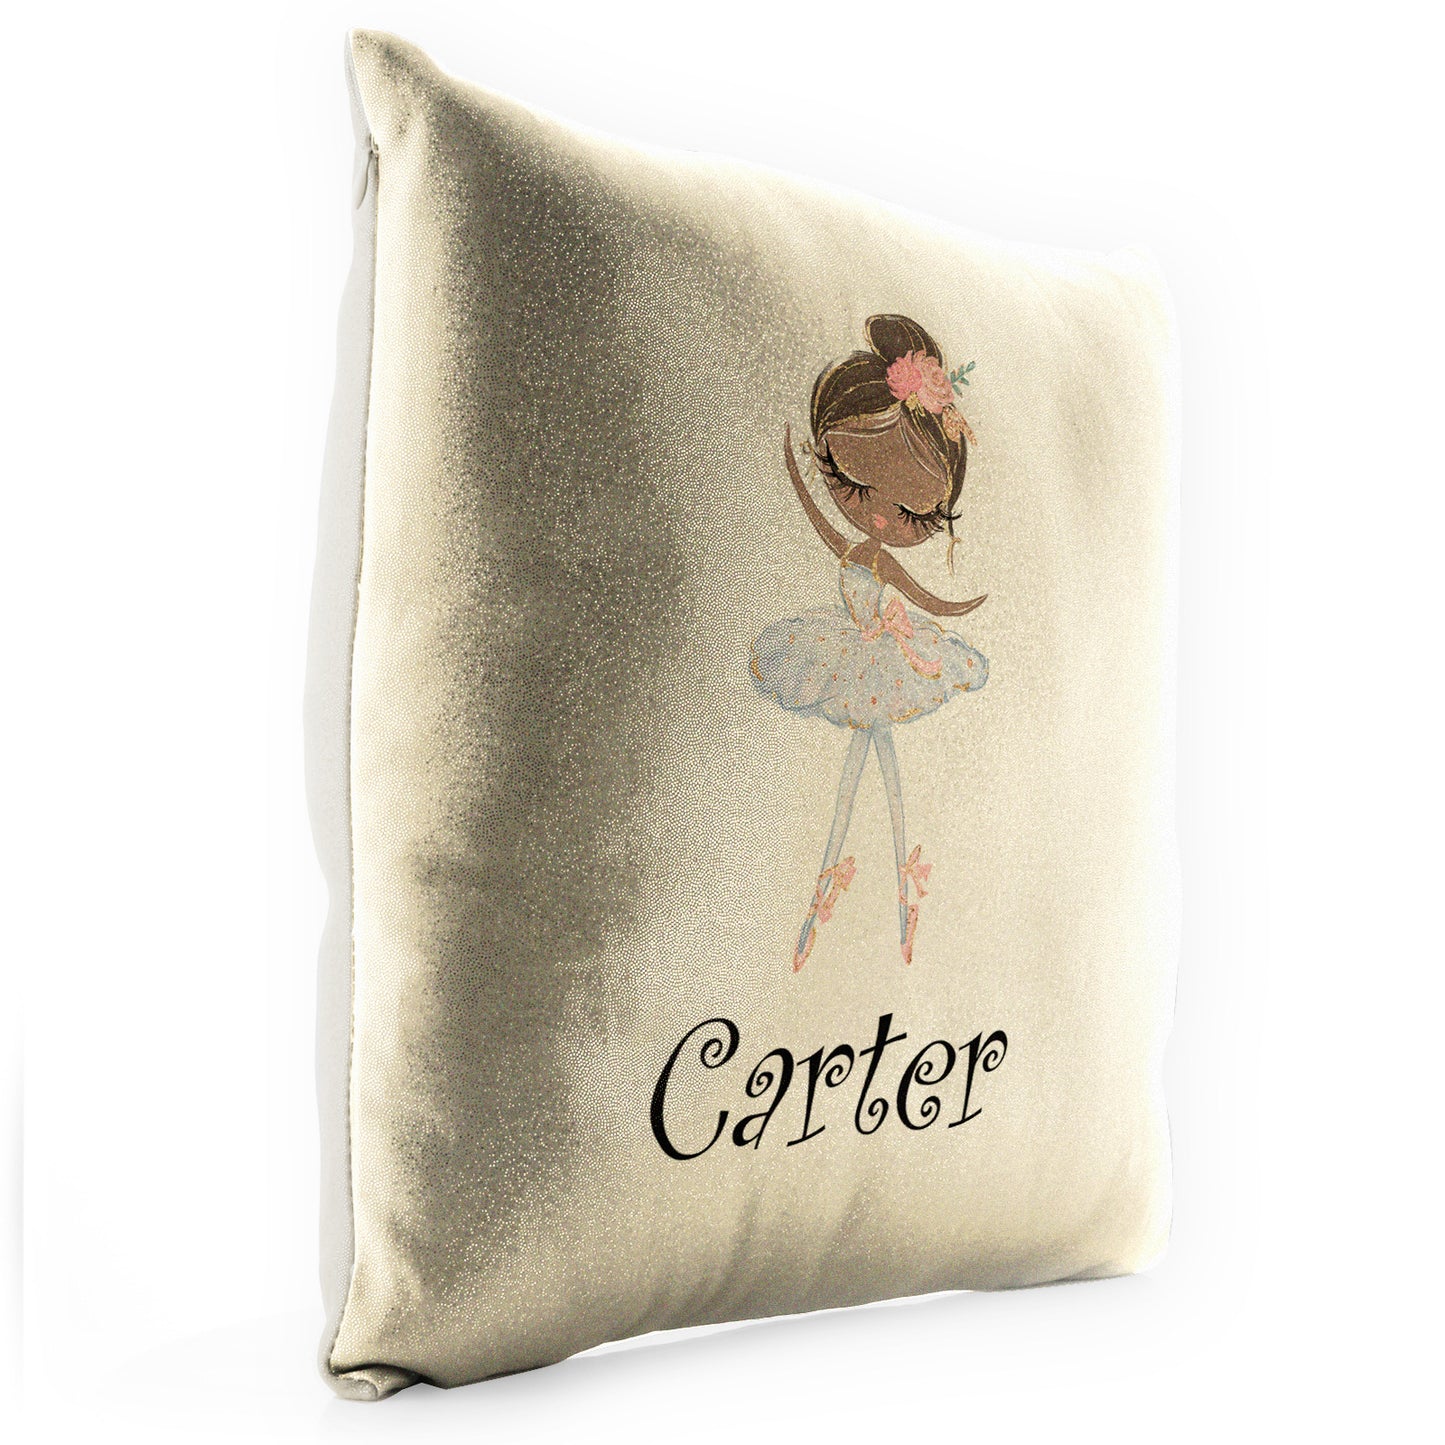 Personalised Glitter Cushion with Cute Text and Black Hair White Dress Ballerina